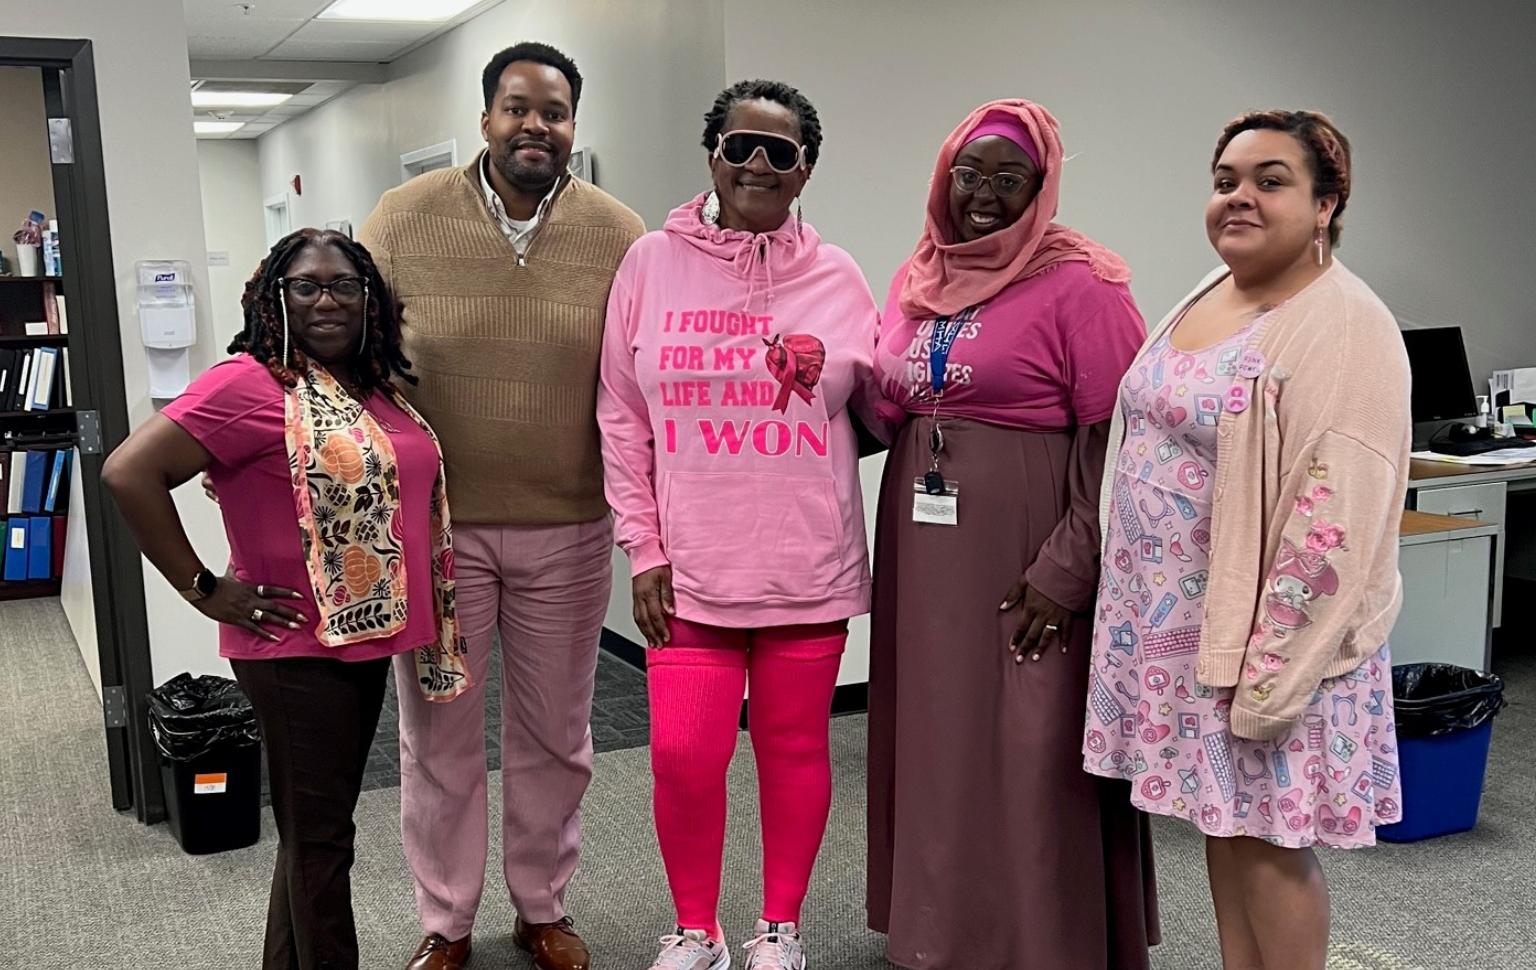 MHA Staff Wear Pink for Breast Cancer Awareness Month